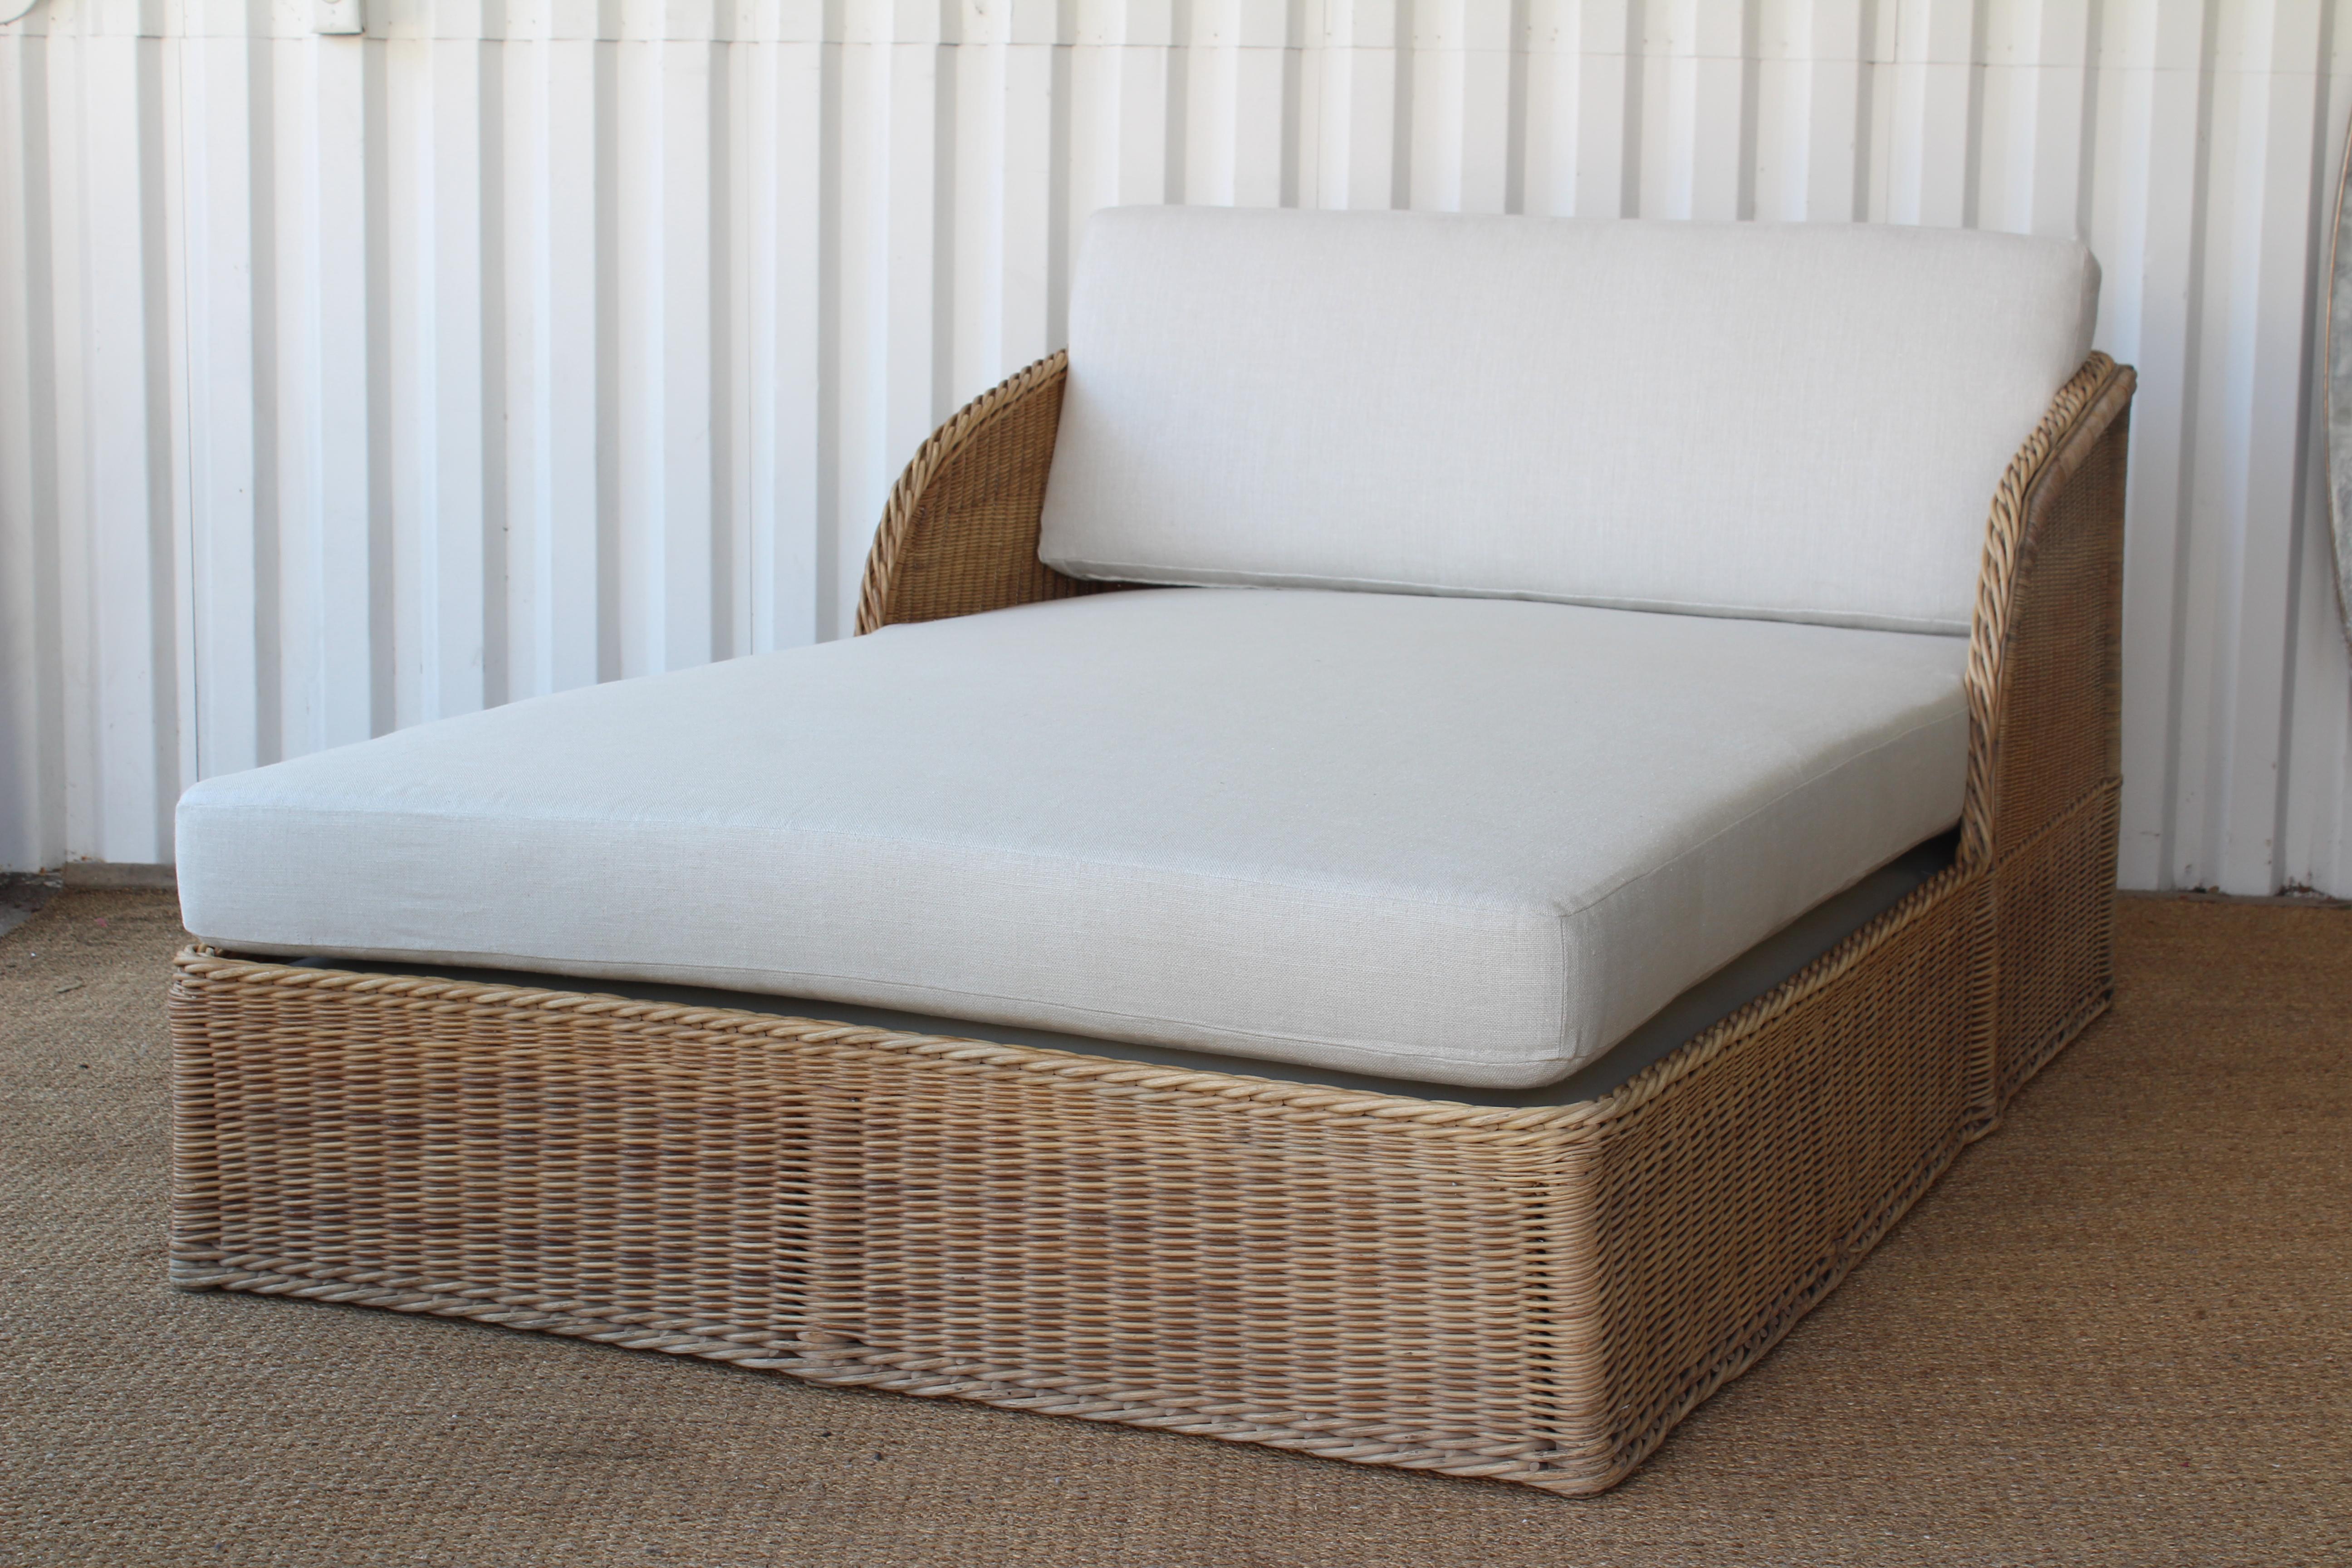 Large wicker double daybed by Michael Taylor, 1980s. New cushions in a neutral Belgian linen. Wicker is in good condition with some age appropriate wear.